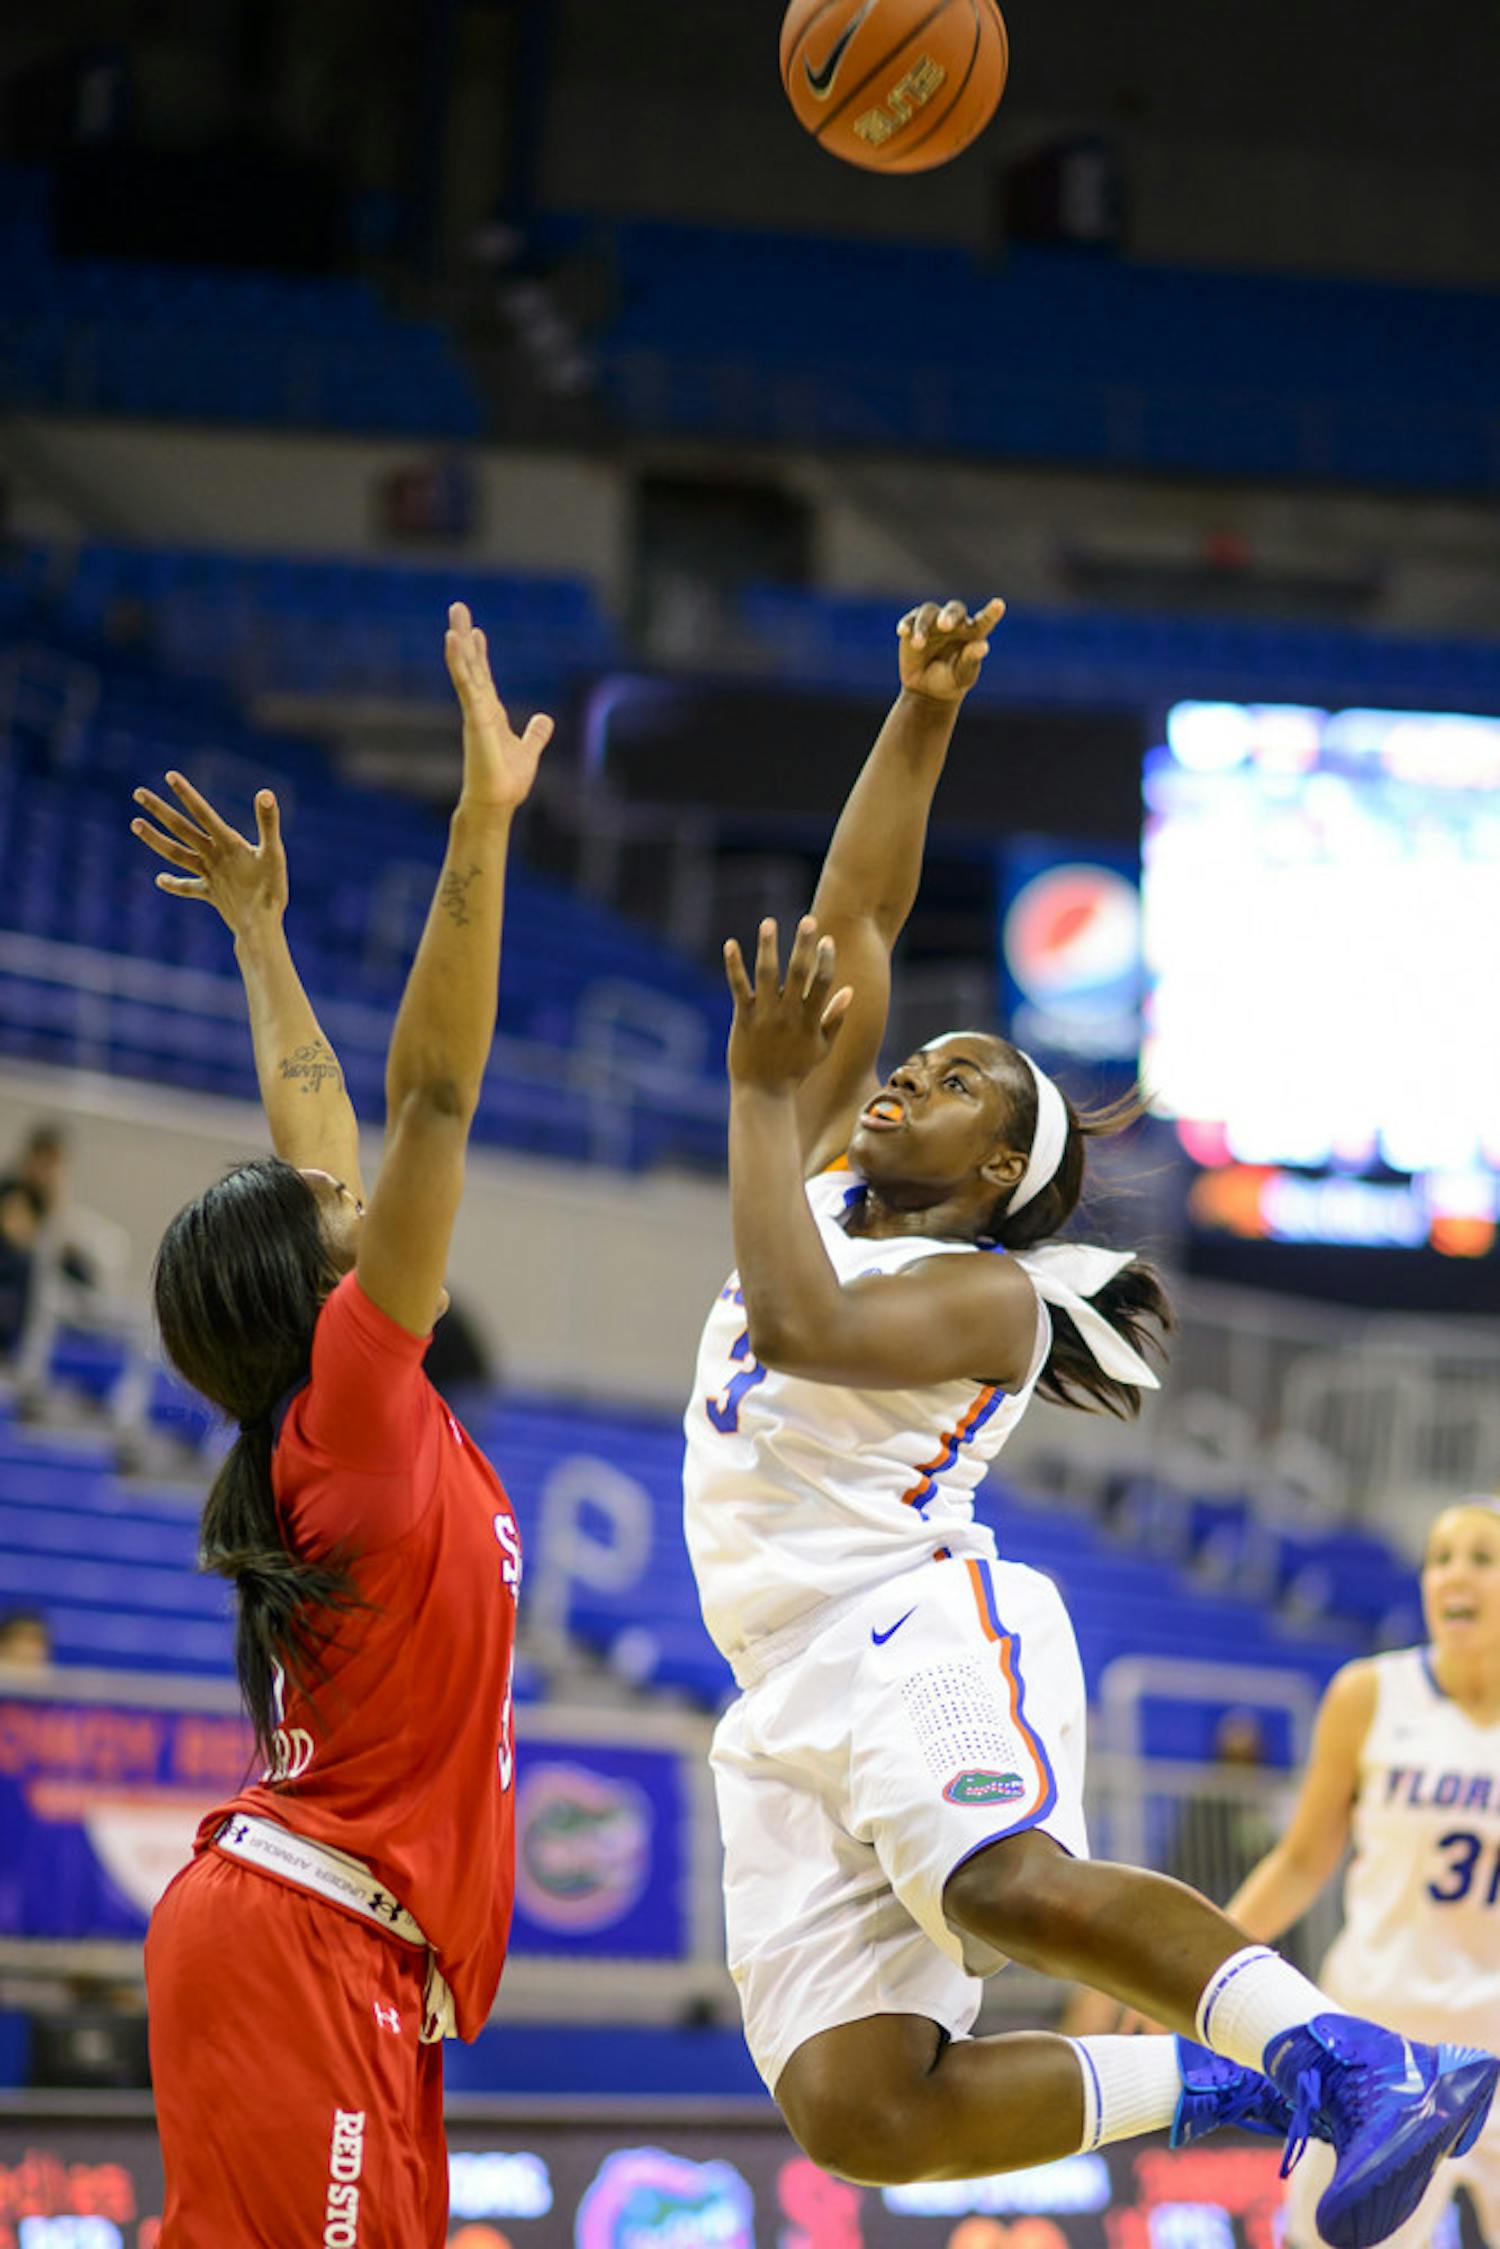 Sophomore guard January Miller attempts a floater down the lane during Florida's 72-68 win against St. John's on Nov. 26 in the O'Connell Center.